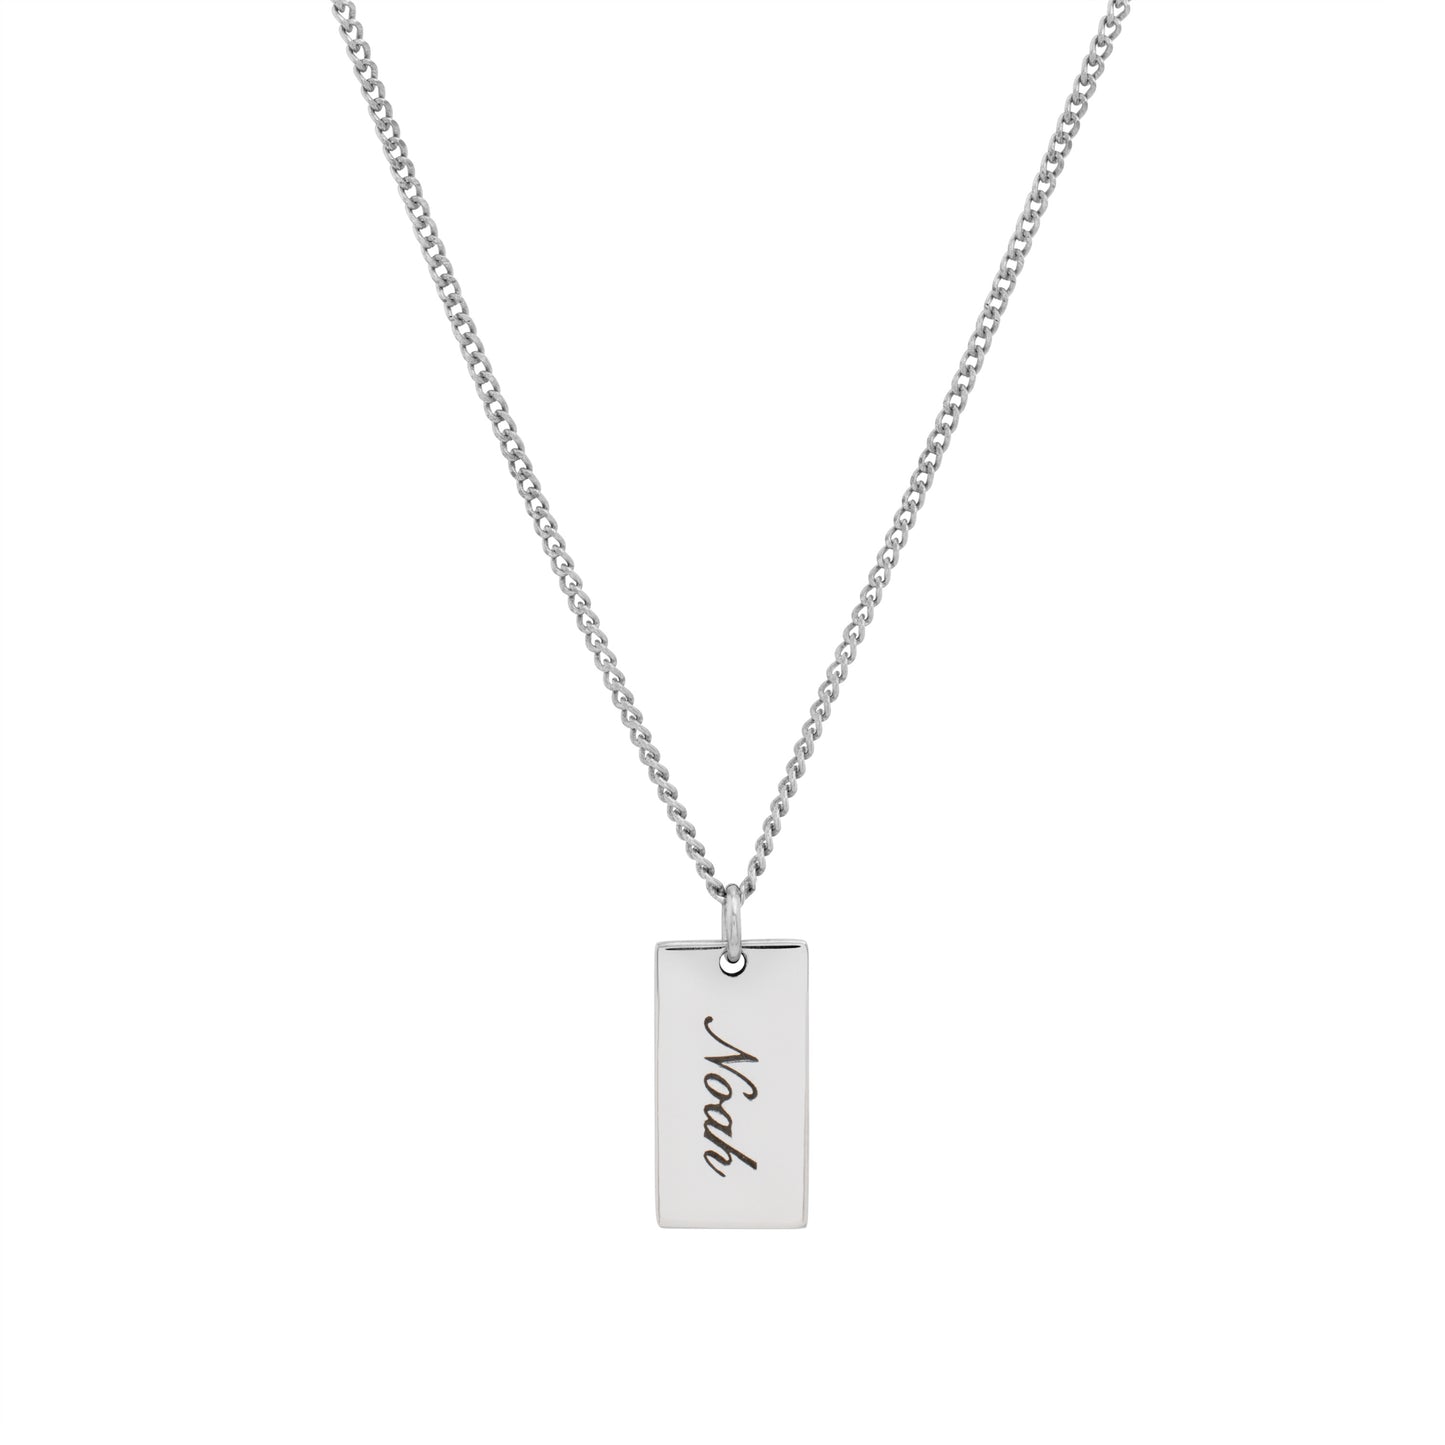 Dog tag necklace